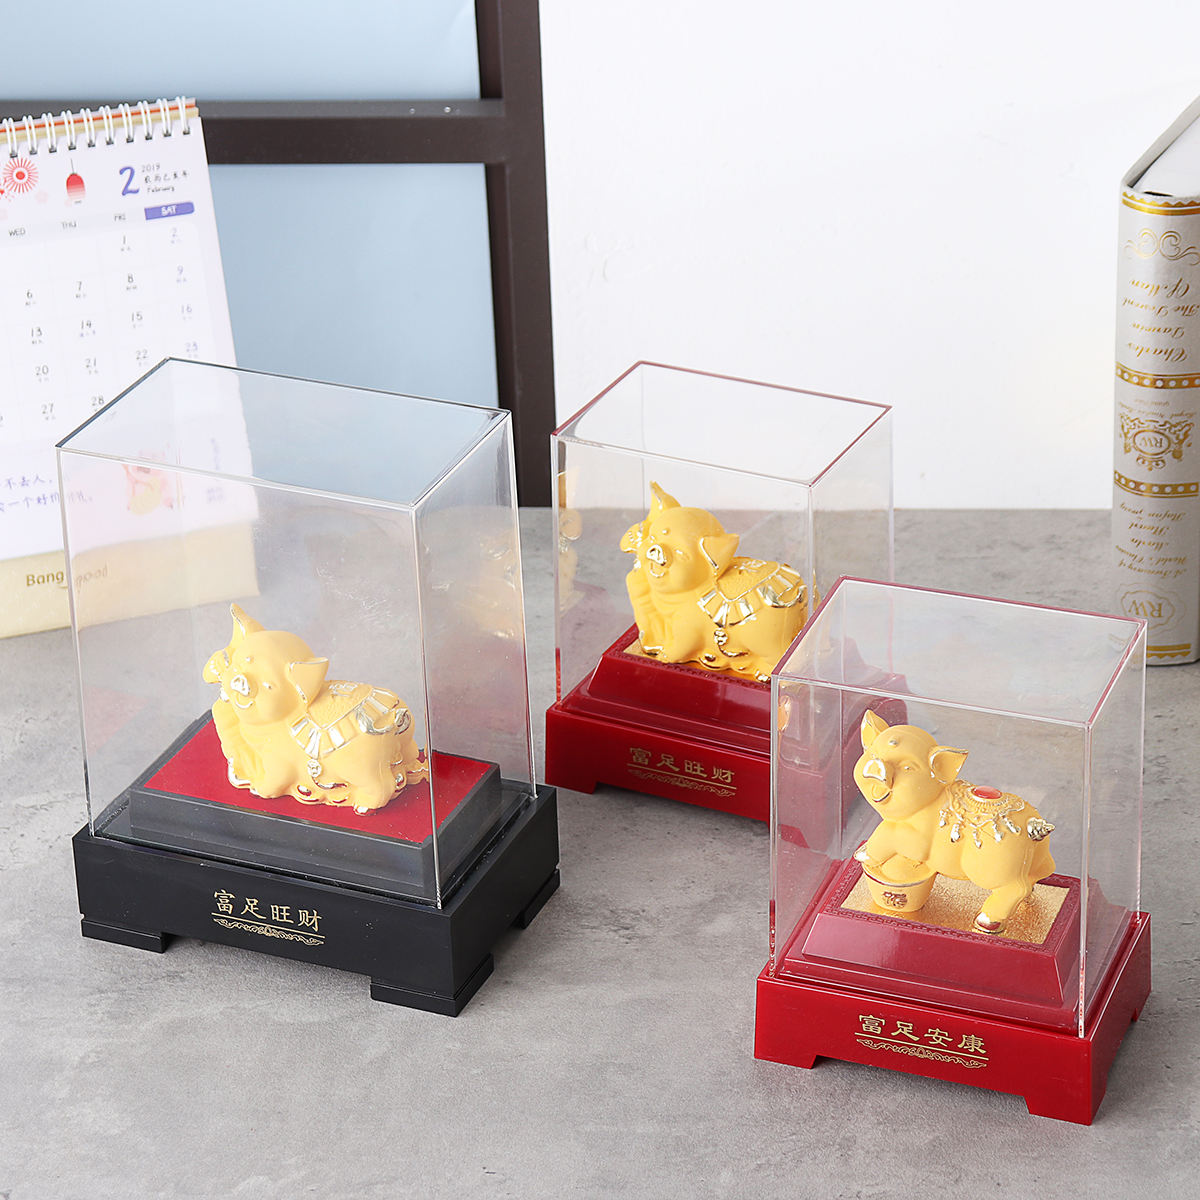 2019-Chinese-Zodiac-Gold-Pig-Money-Wealth-Statue-Office-Home-Decorations-Ornament-Gift-1515810-2